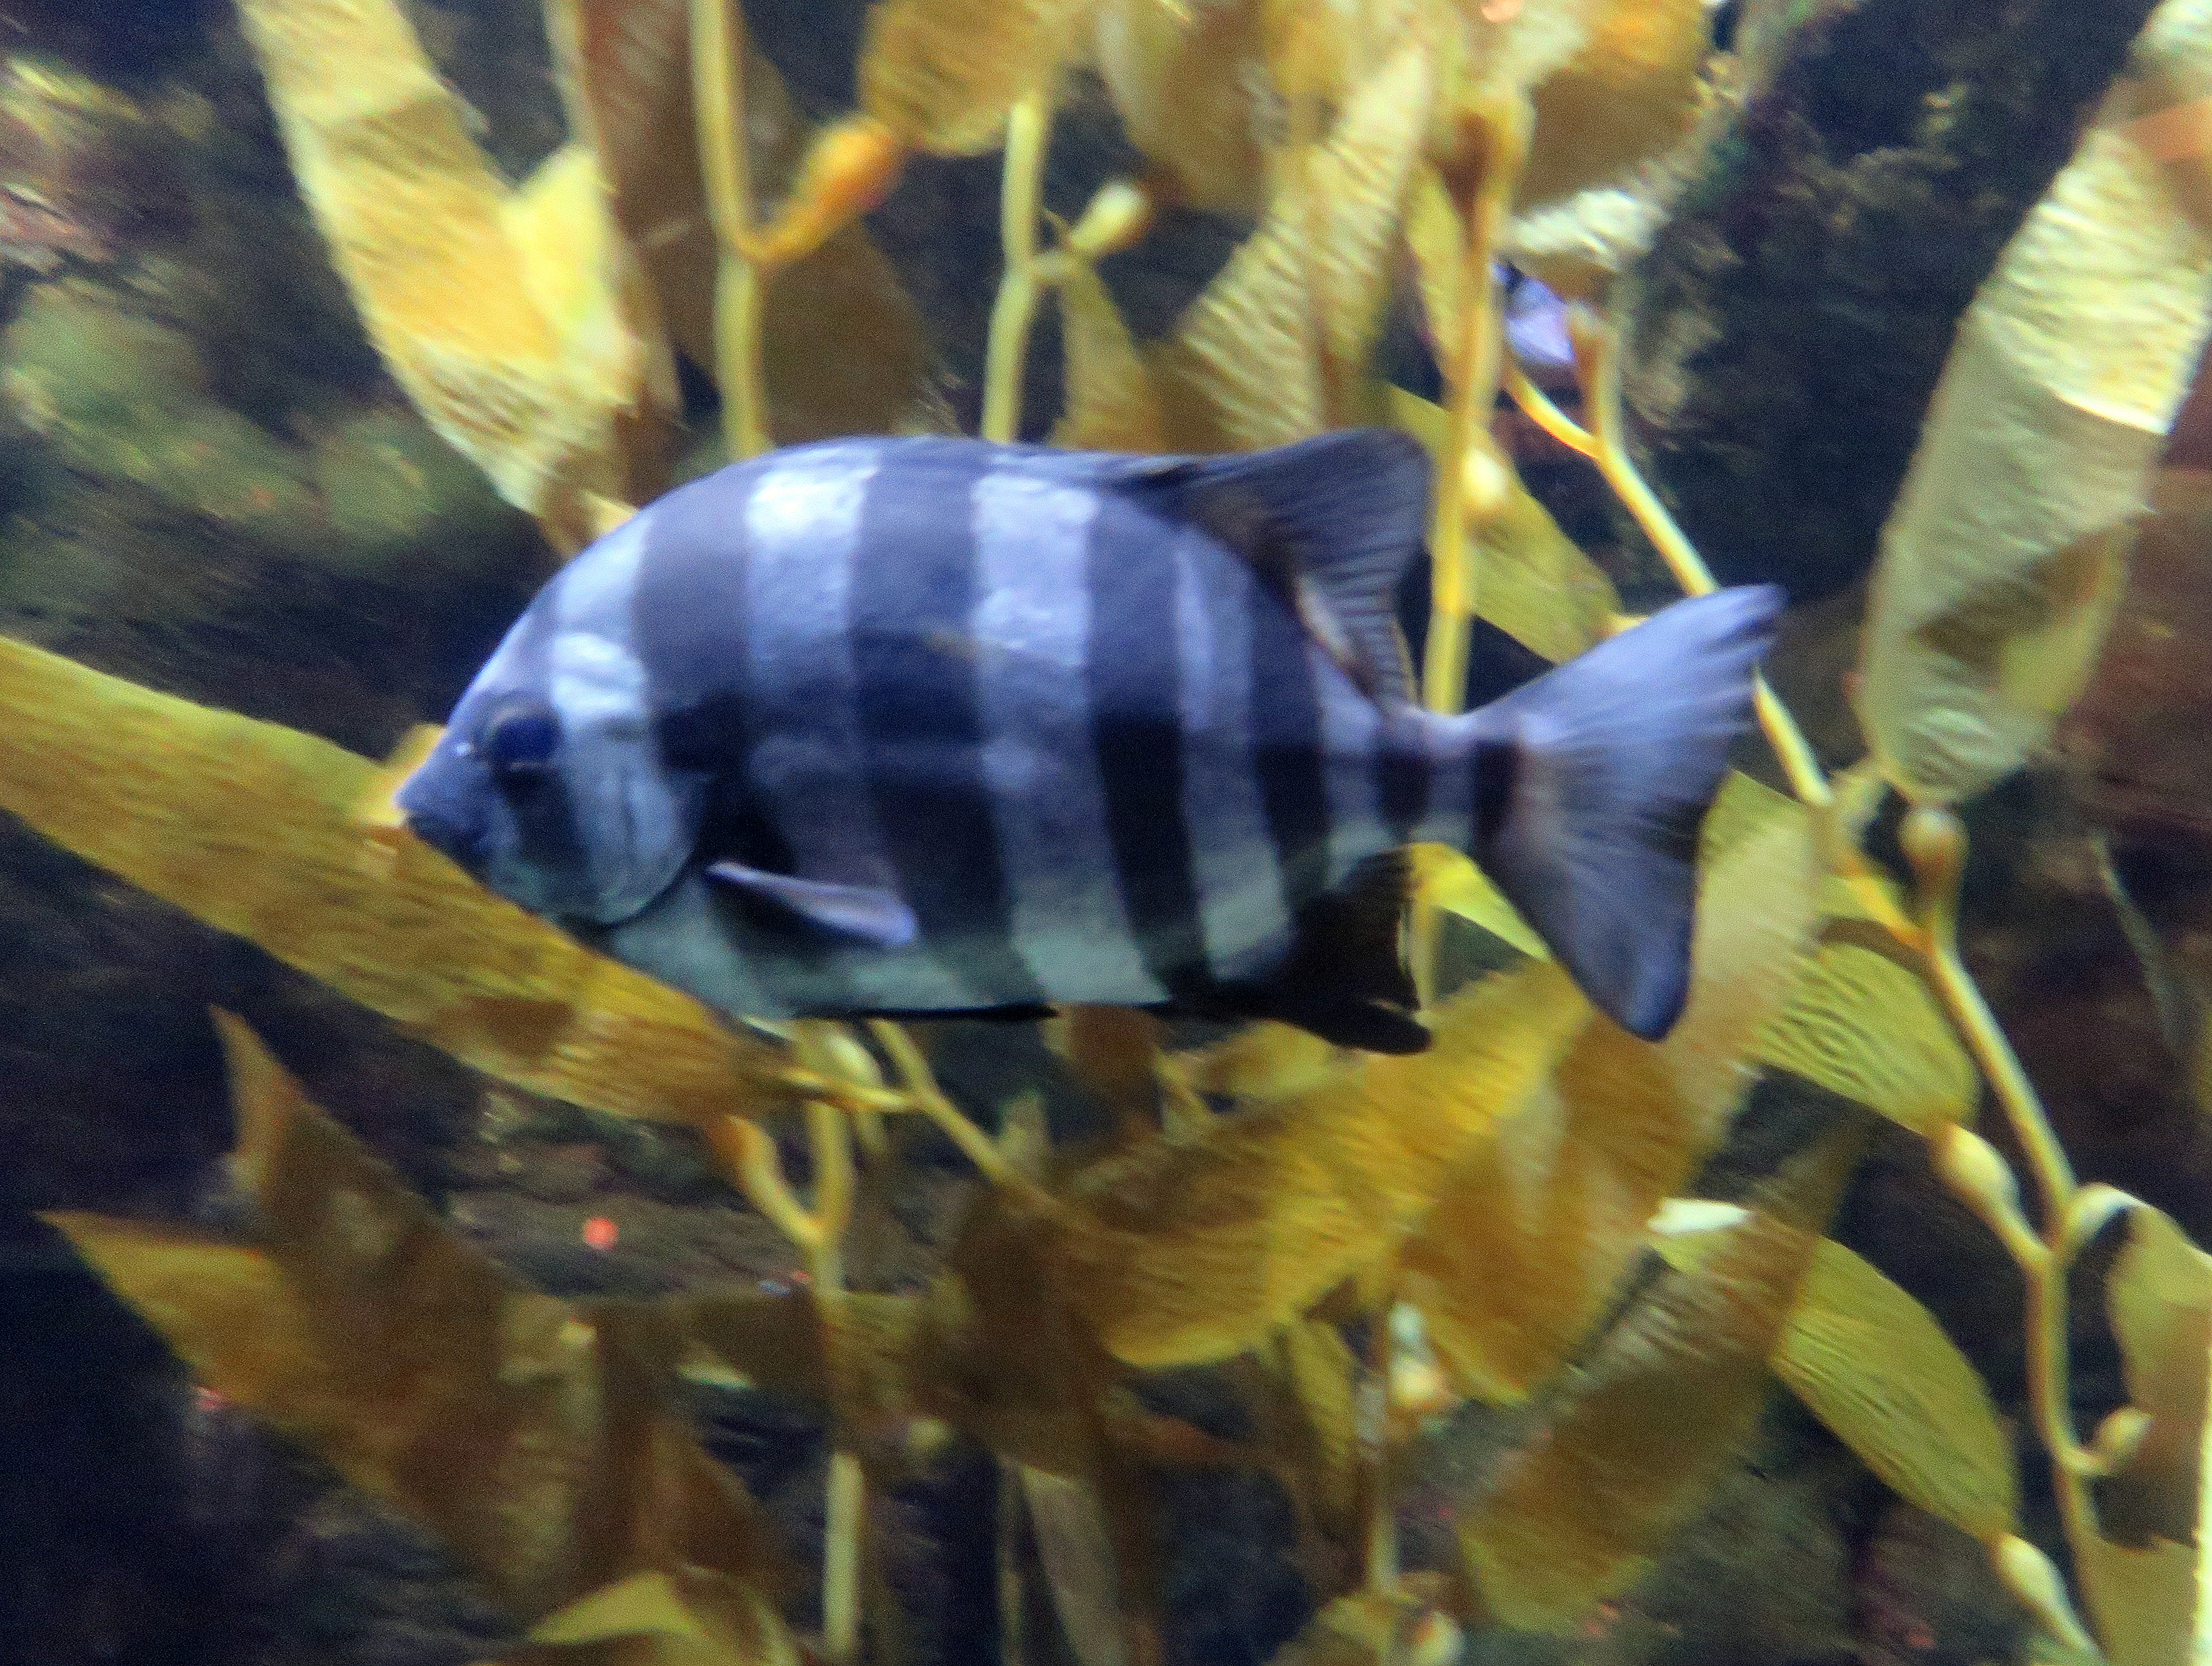 A striped beakfish that hitchhiked across the Pacific Ocean via a probable tsunami wreck now swims at the Oregon Coast Aquarium. (Photo by Tom Banse, Northwest News Network - Oregon)